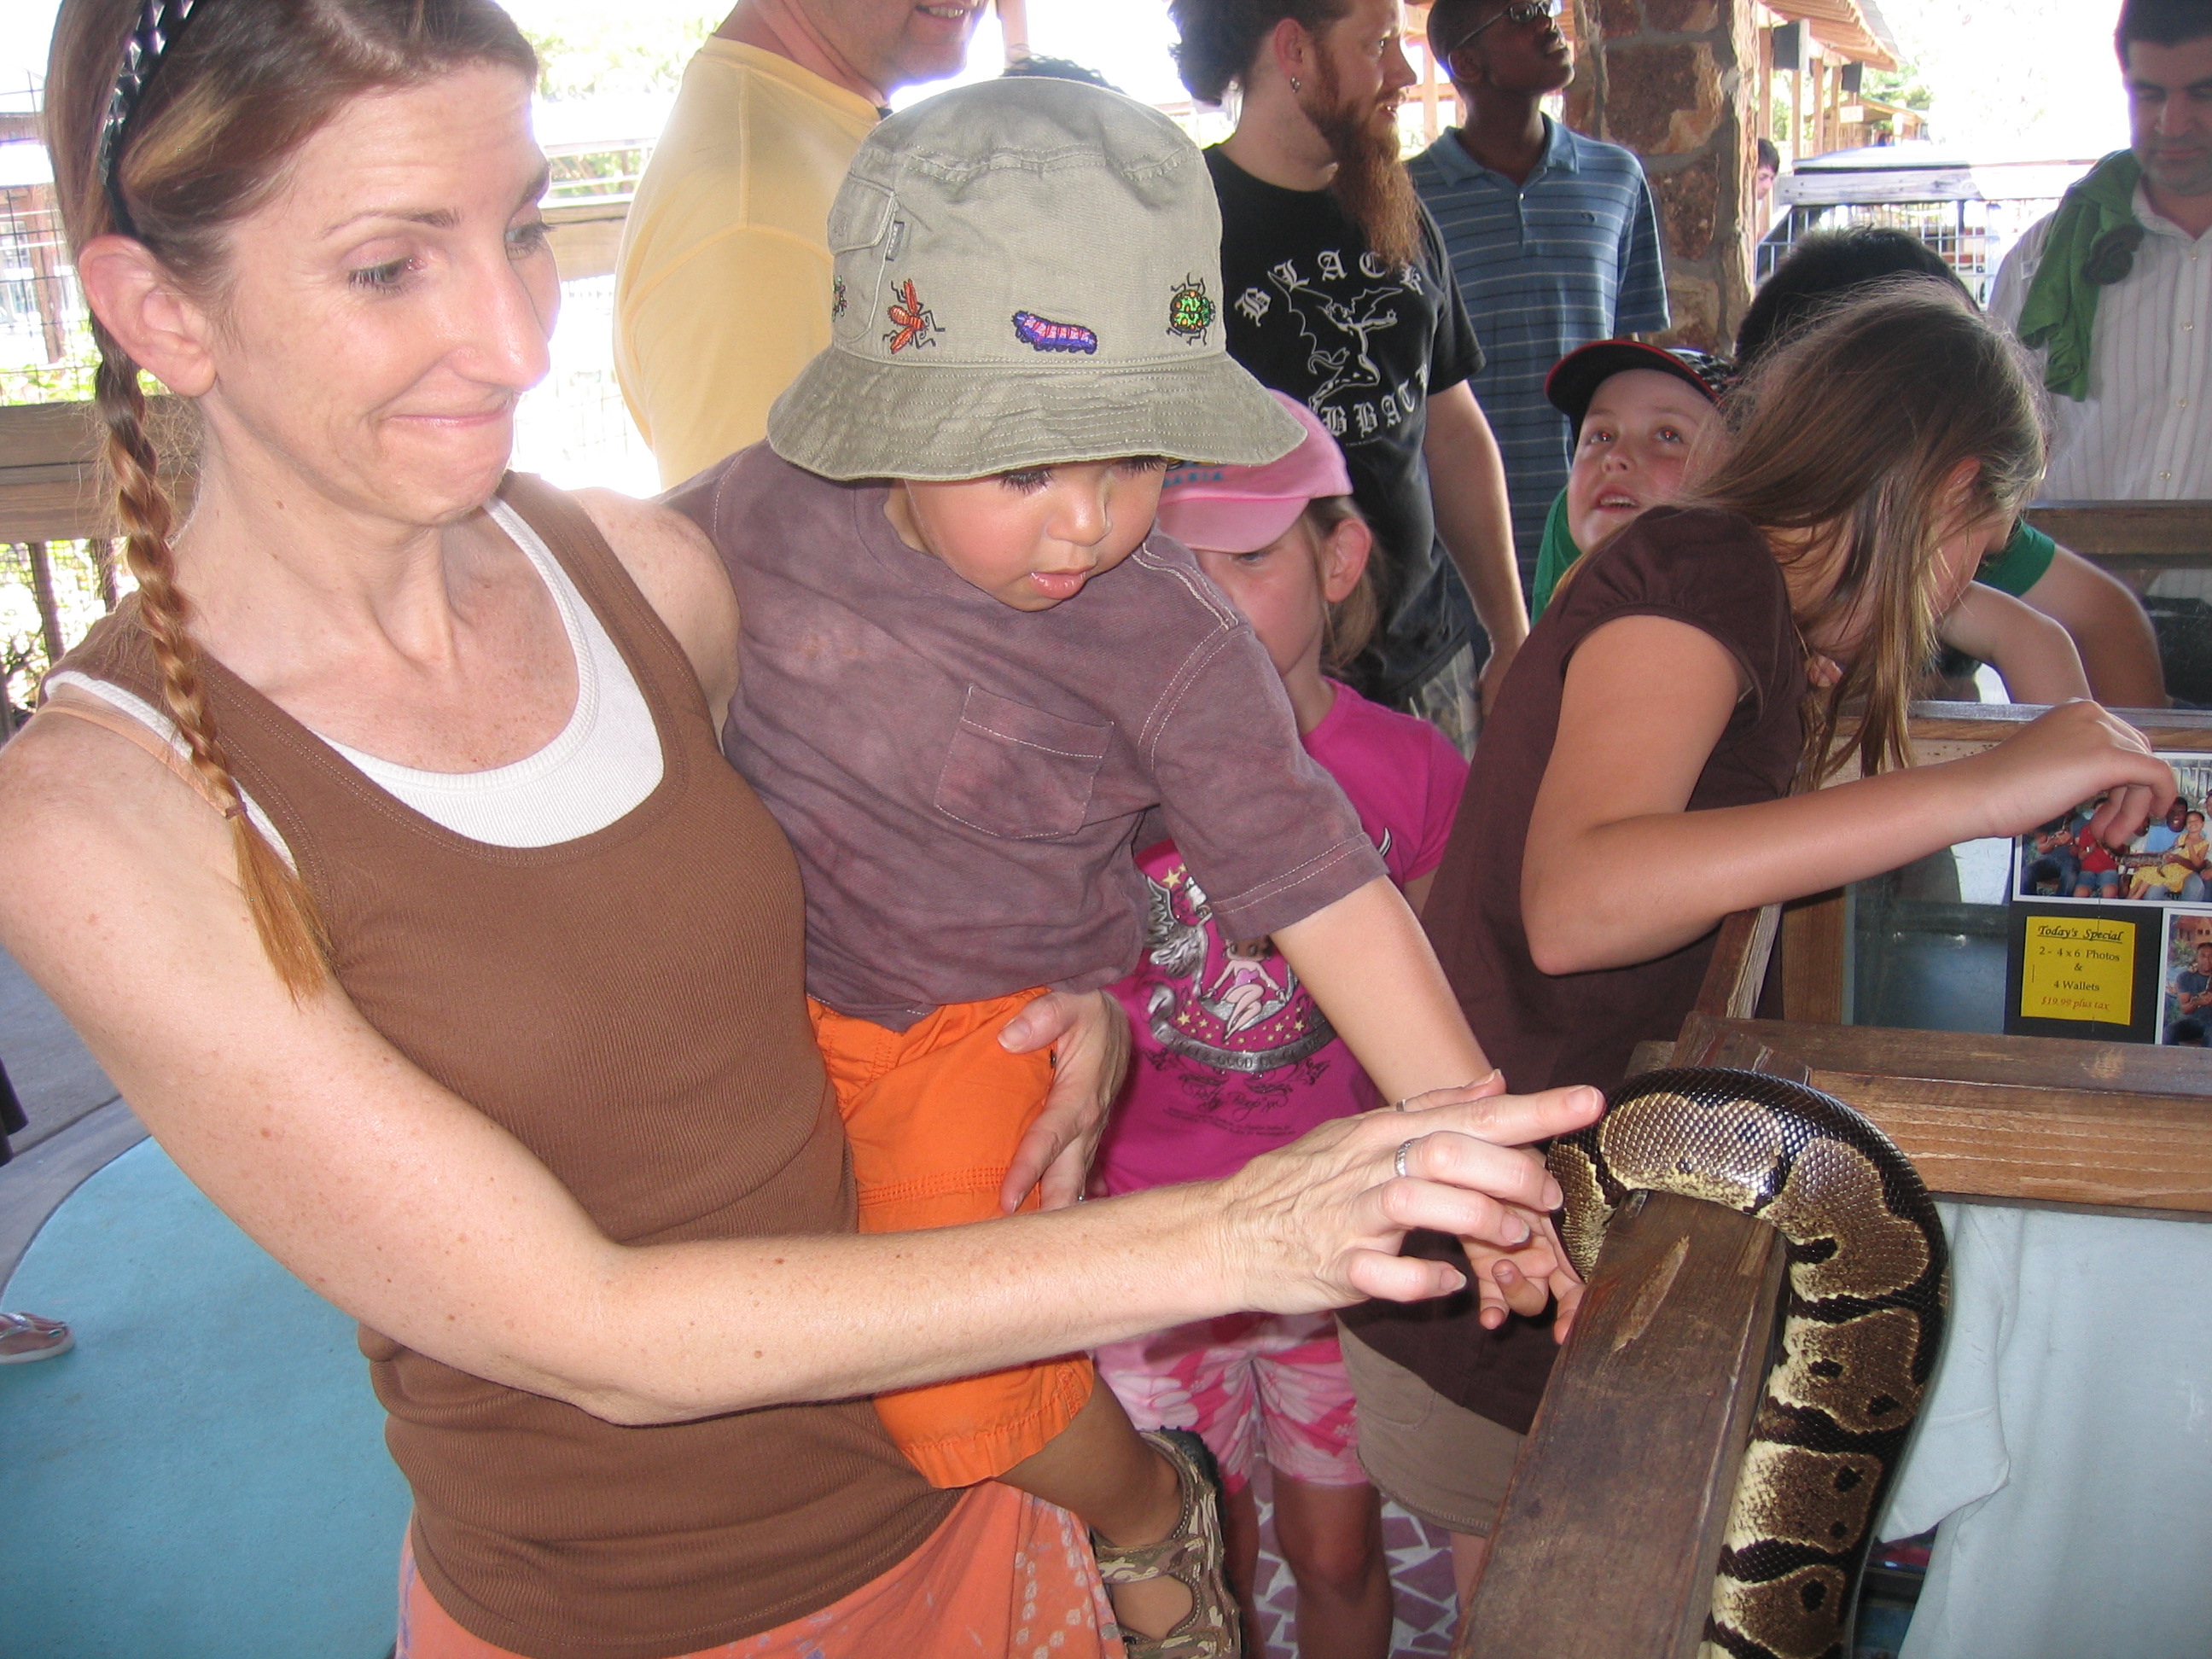 "Mommy...pllleeeaase touch the snake with me. Don't be afraid...I'll protect you!"